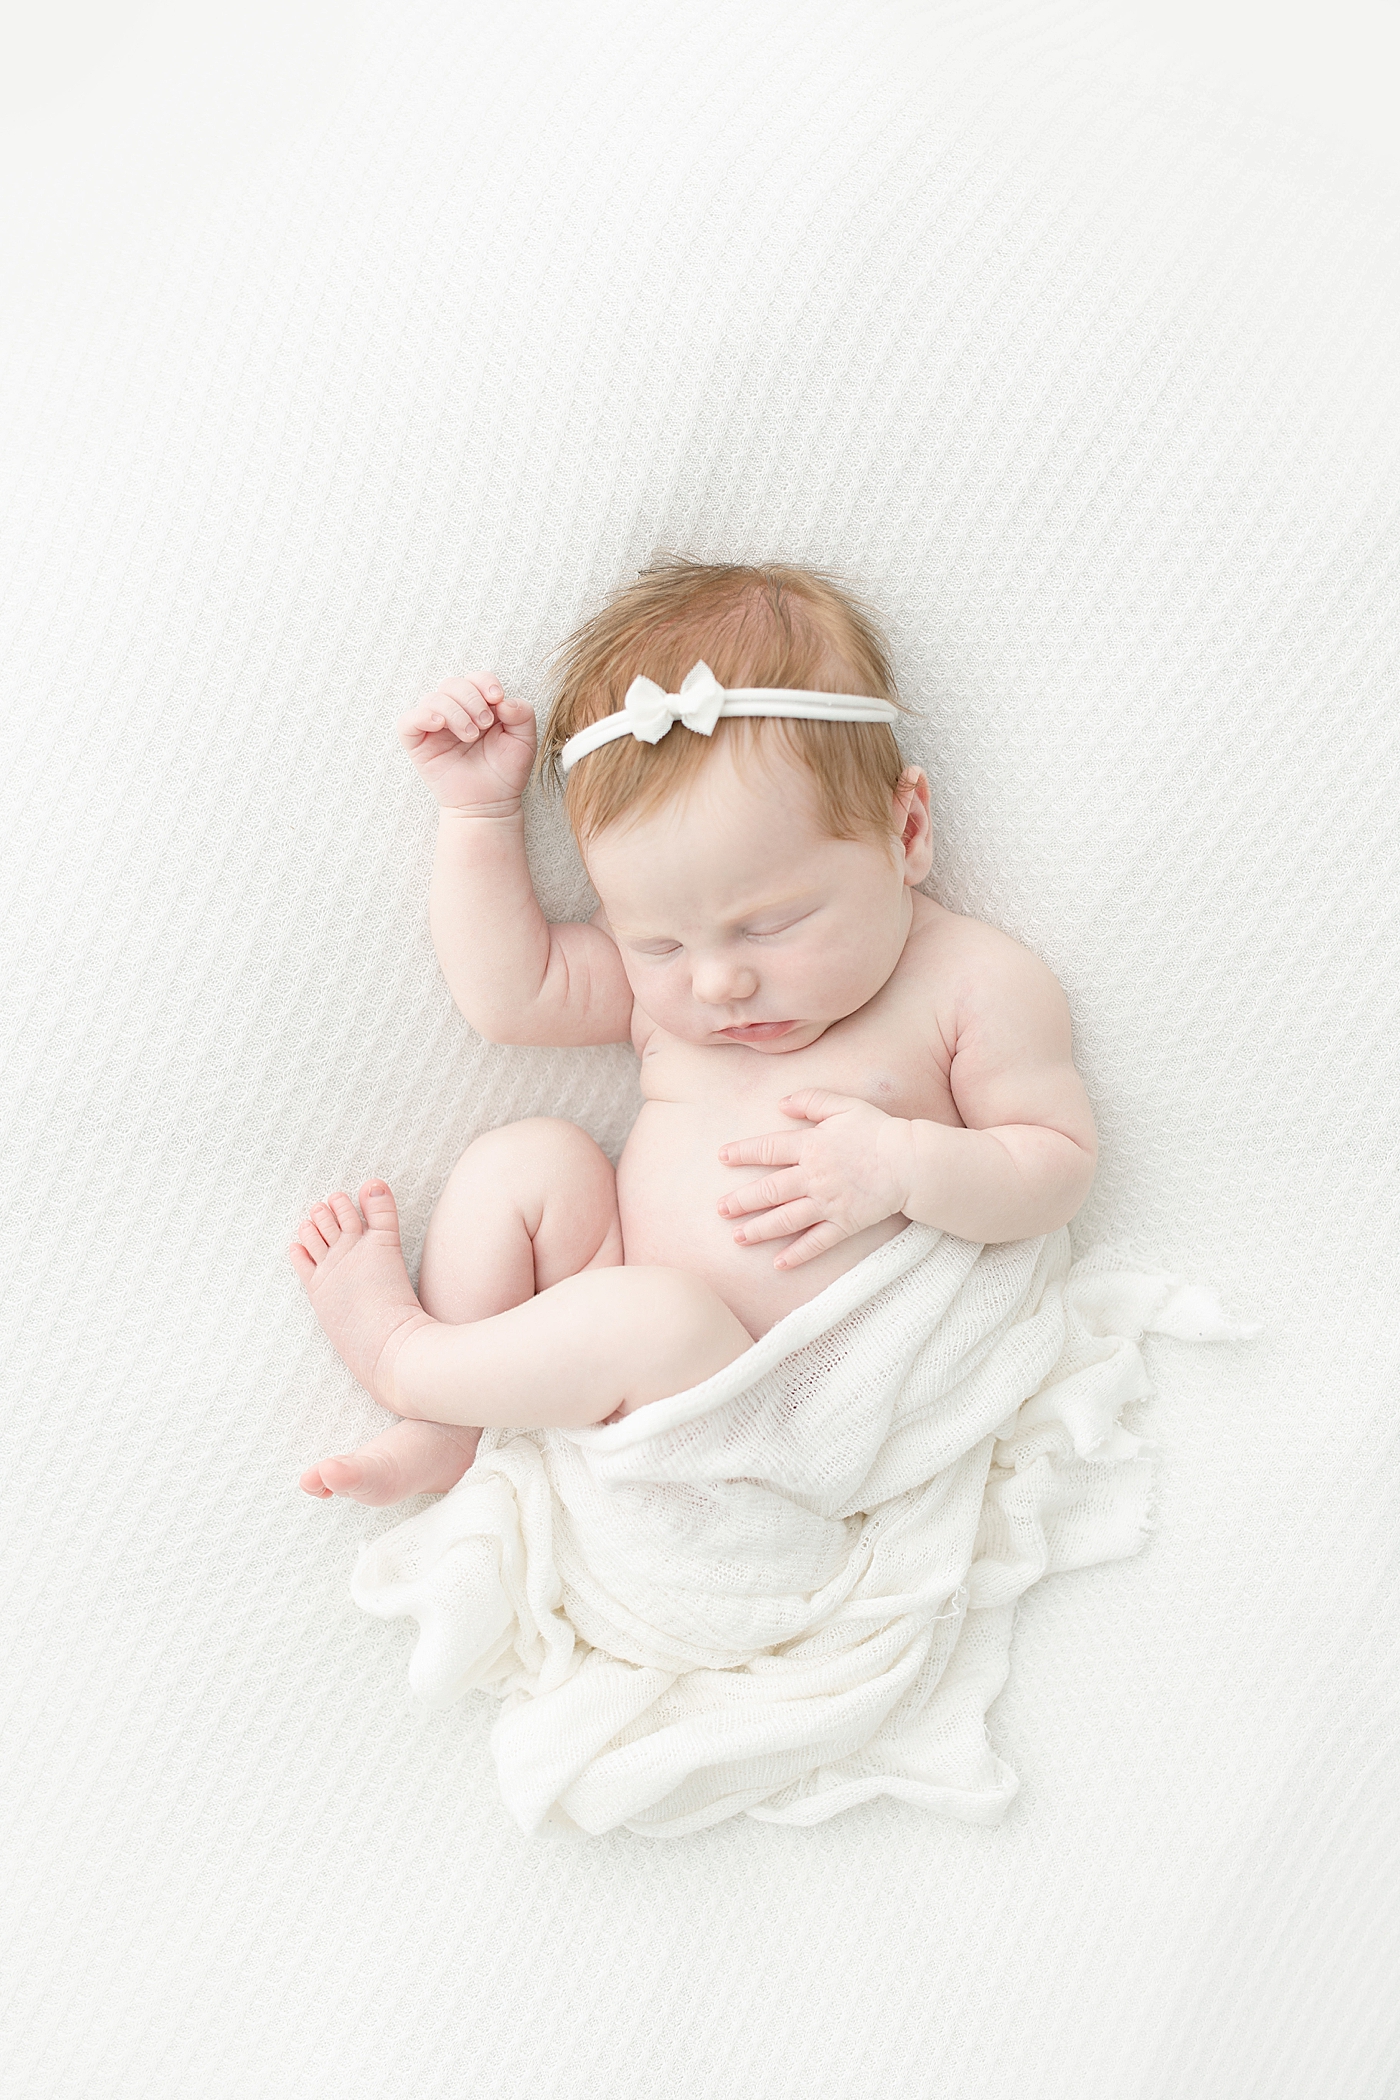 Sleeping baby girl in white swaddle and headband | Photo by Little Sunshine Photography